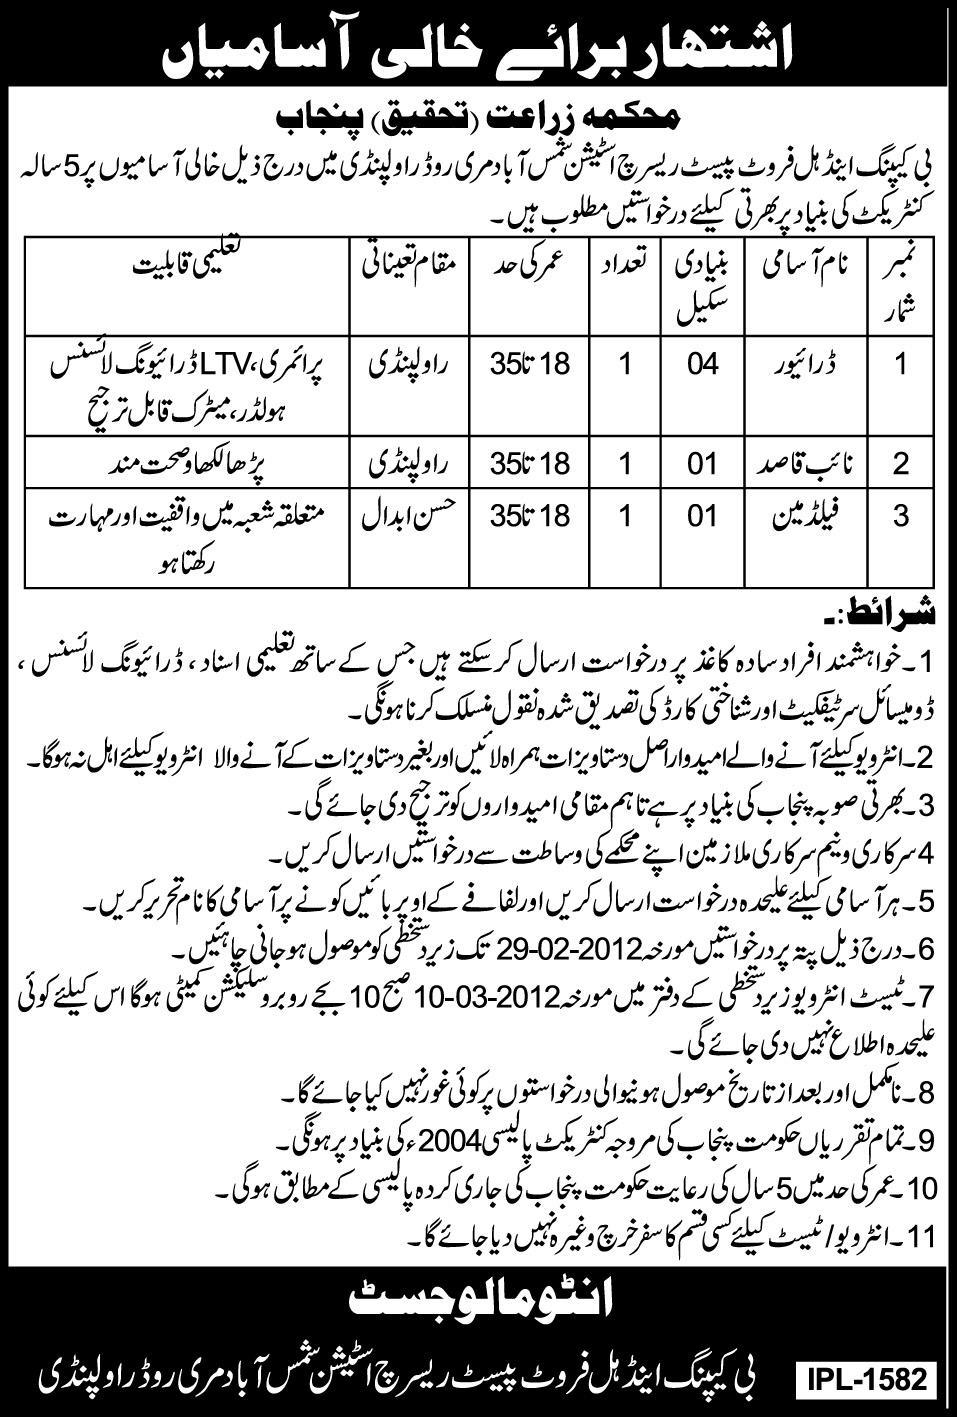 Agricultural Research Department Punjab, Rawalpindi Jobs Opportunity